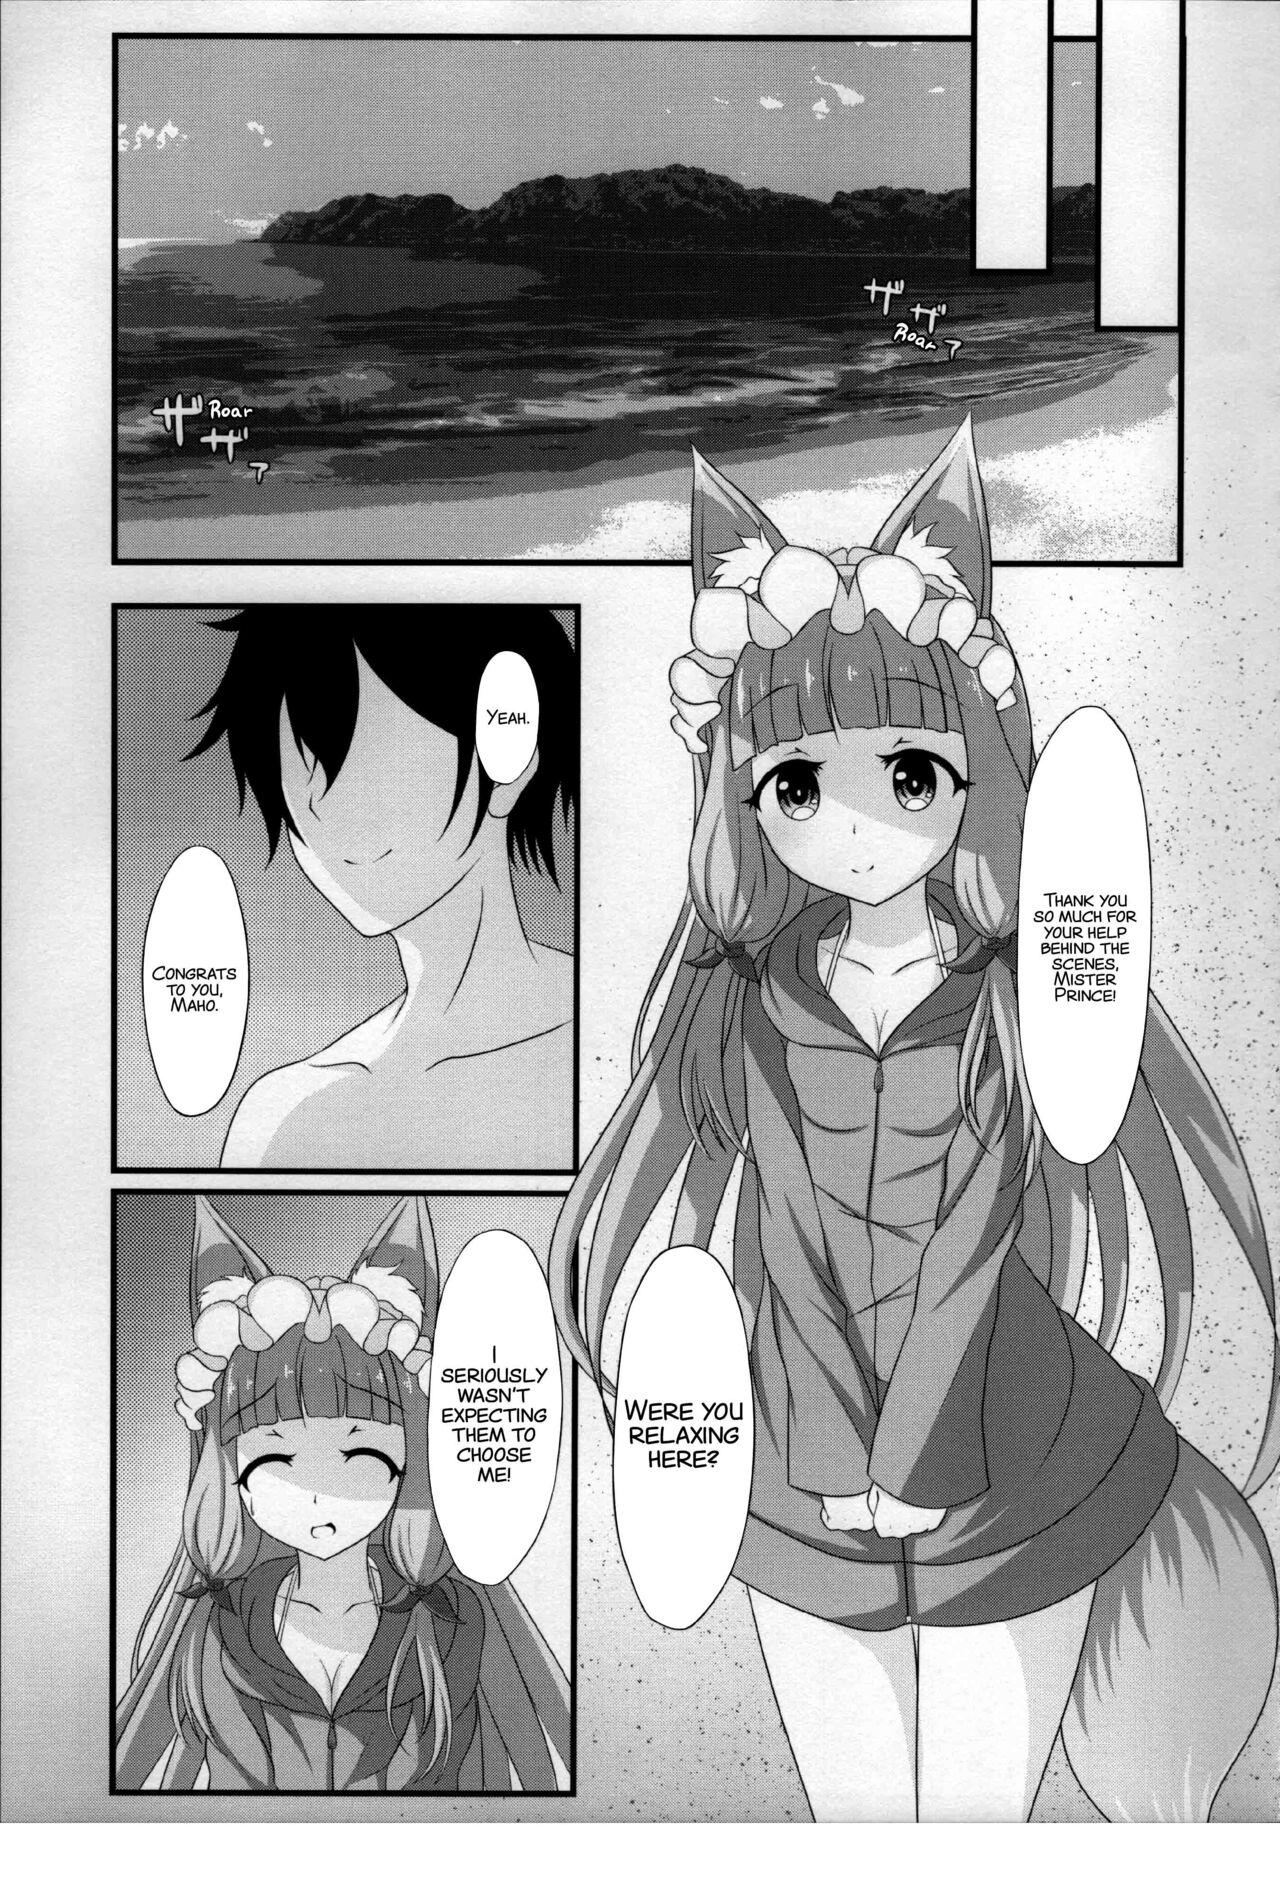 Nude Maho Hime Connect! 2 - Princess connect 1080p - Page 6